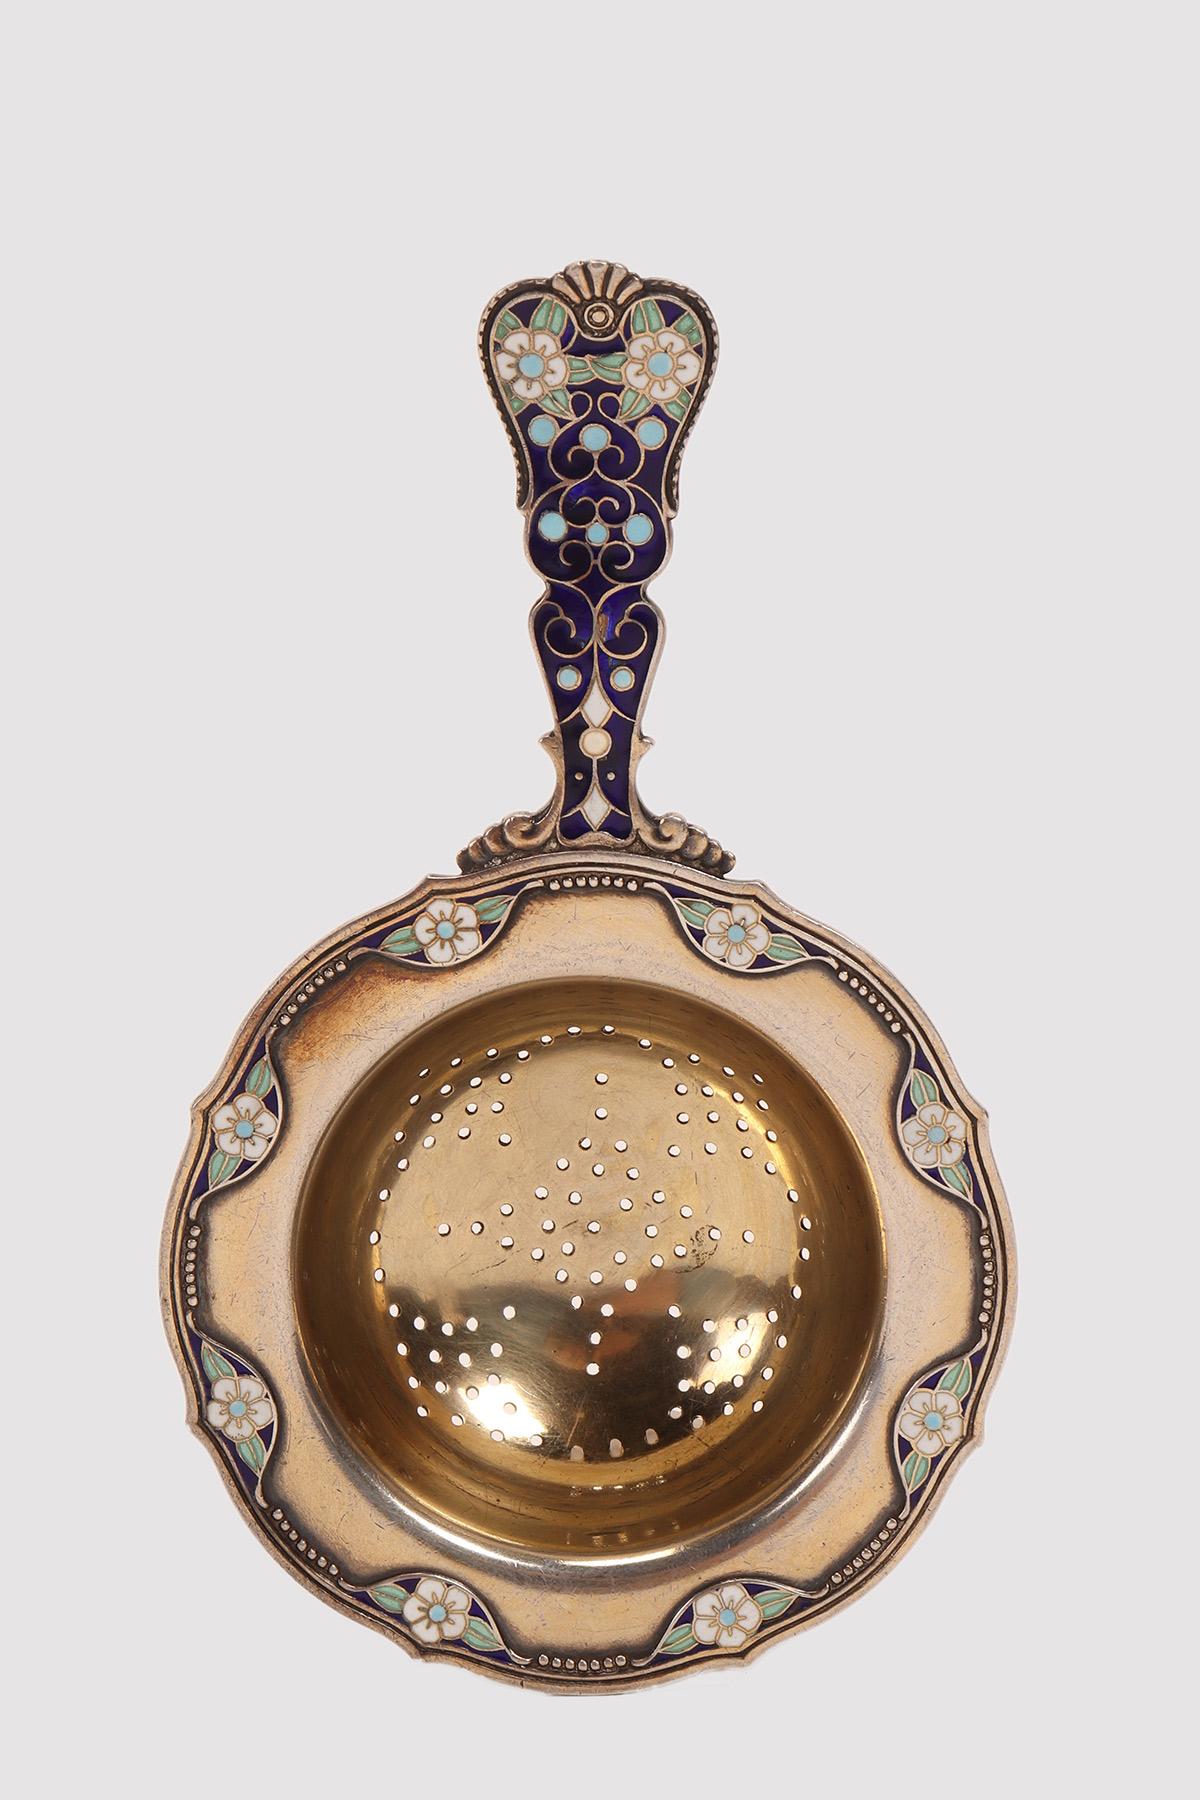 Tea strainer with handle, in gilt silver and floral decoration, with blue, white and green cloisonné enamels. Work of the famous silversmith David Andersen, house founded in 1876. Christiana, Denmark, circa 1900.